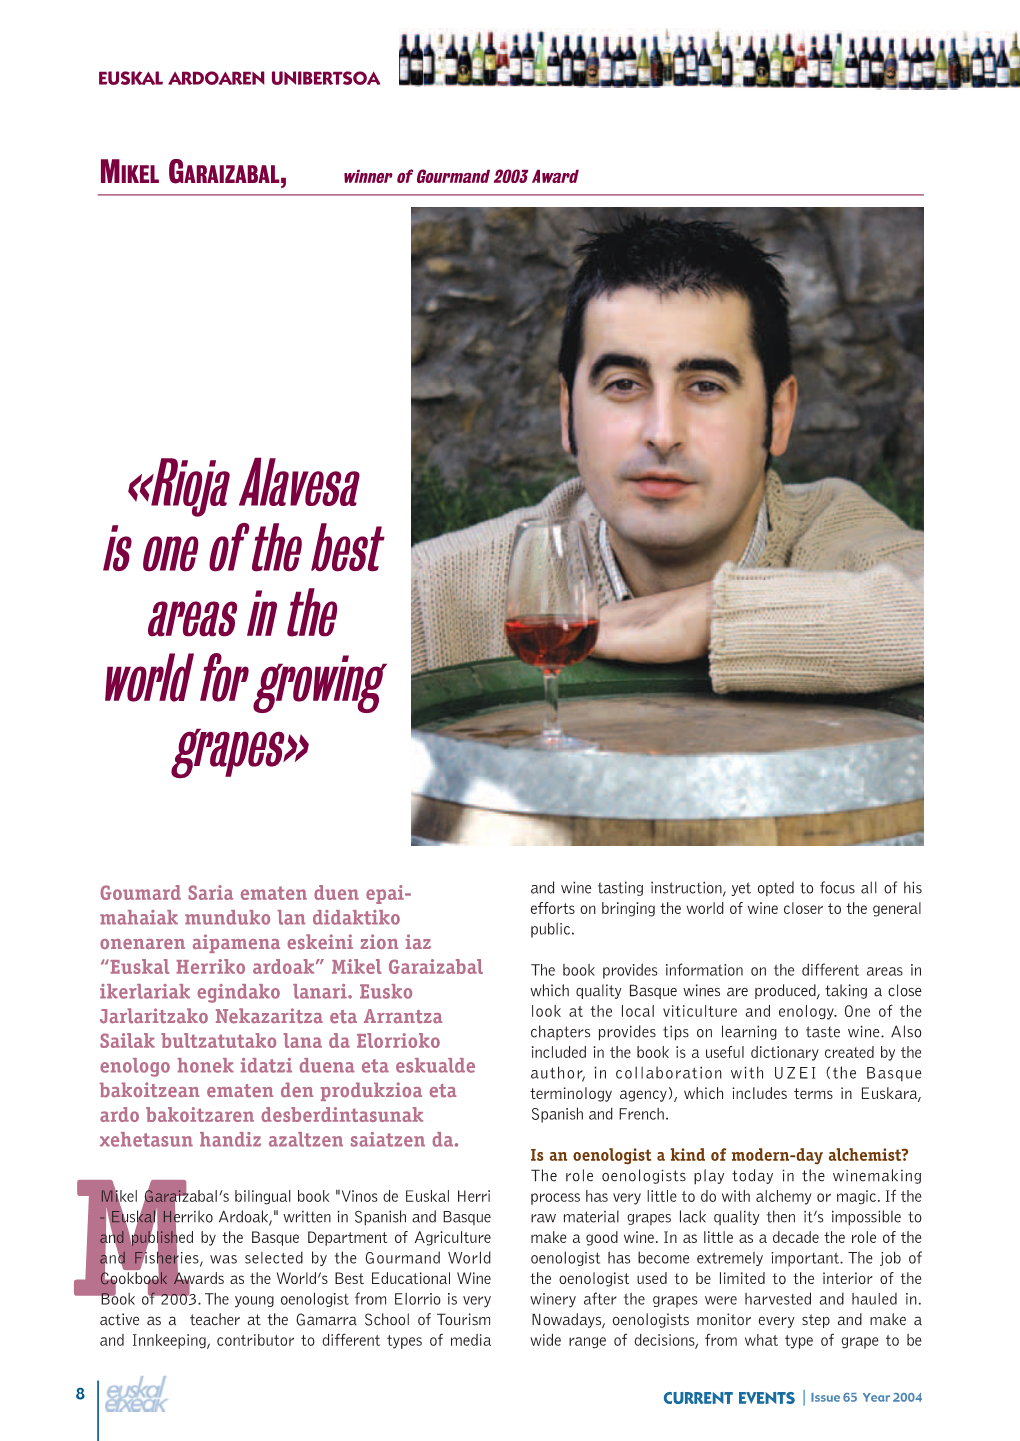 «Rioja Alavesa Is One of the Best Areas in the World for Growing Grapes»